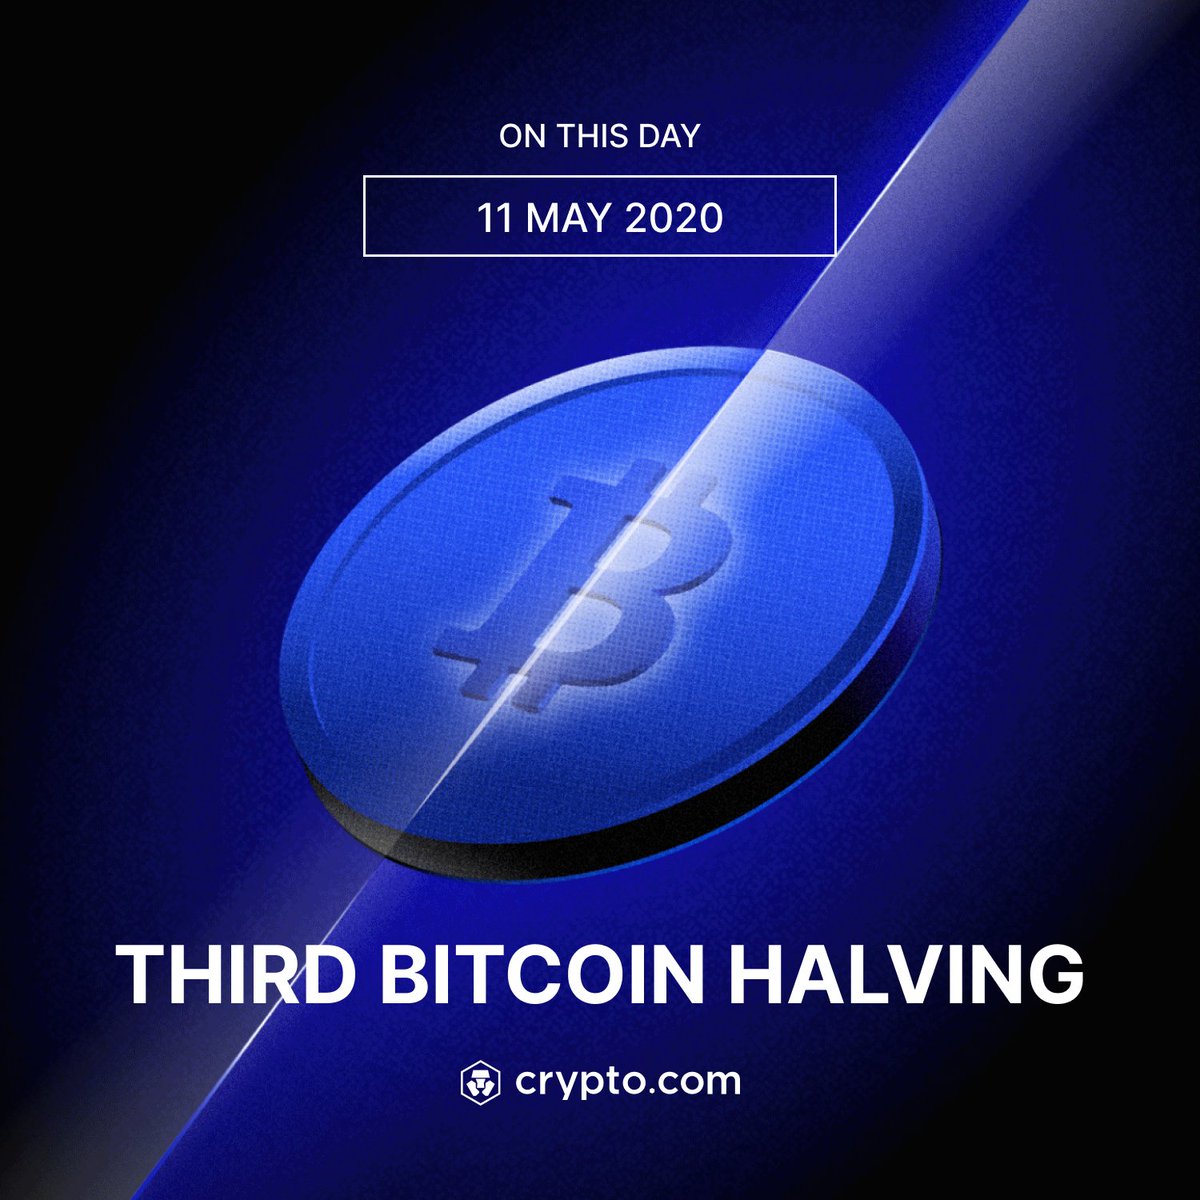 On this day in 2020, 3rd #Bitcoin Halving occurred which reduced the block rewards from 12.5 #BTC to 6.25 $BTC